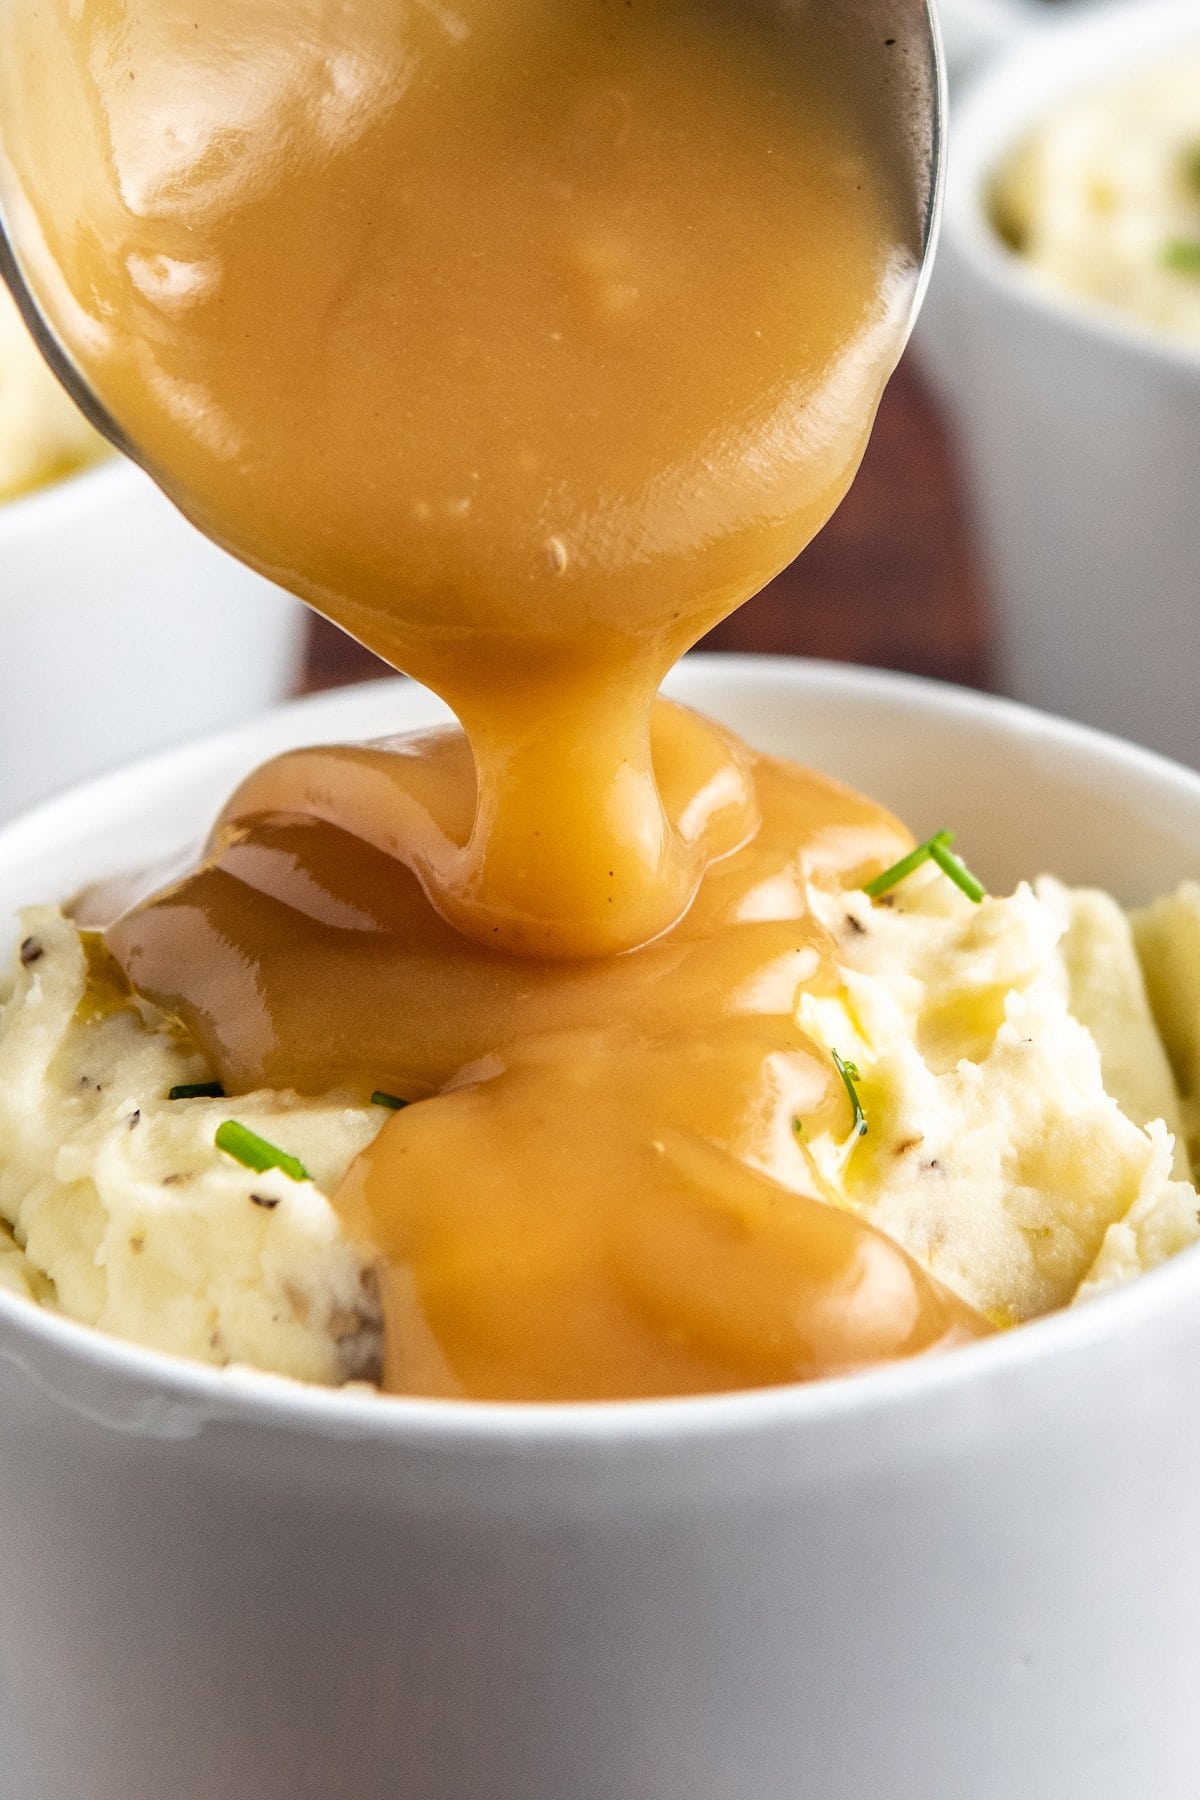 Gravy being poured on top of mashed potatoes in a bowl.